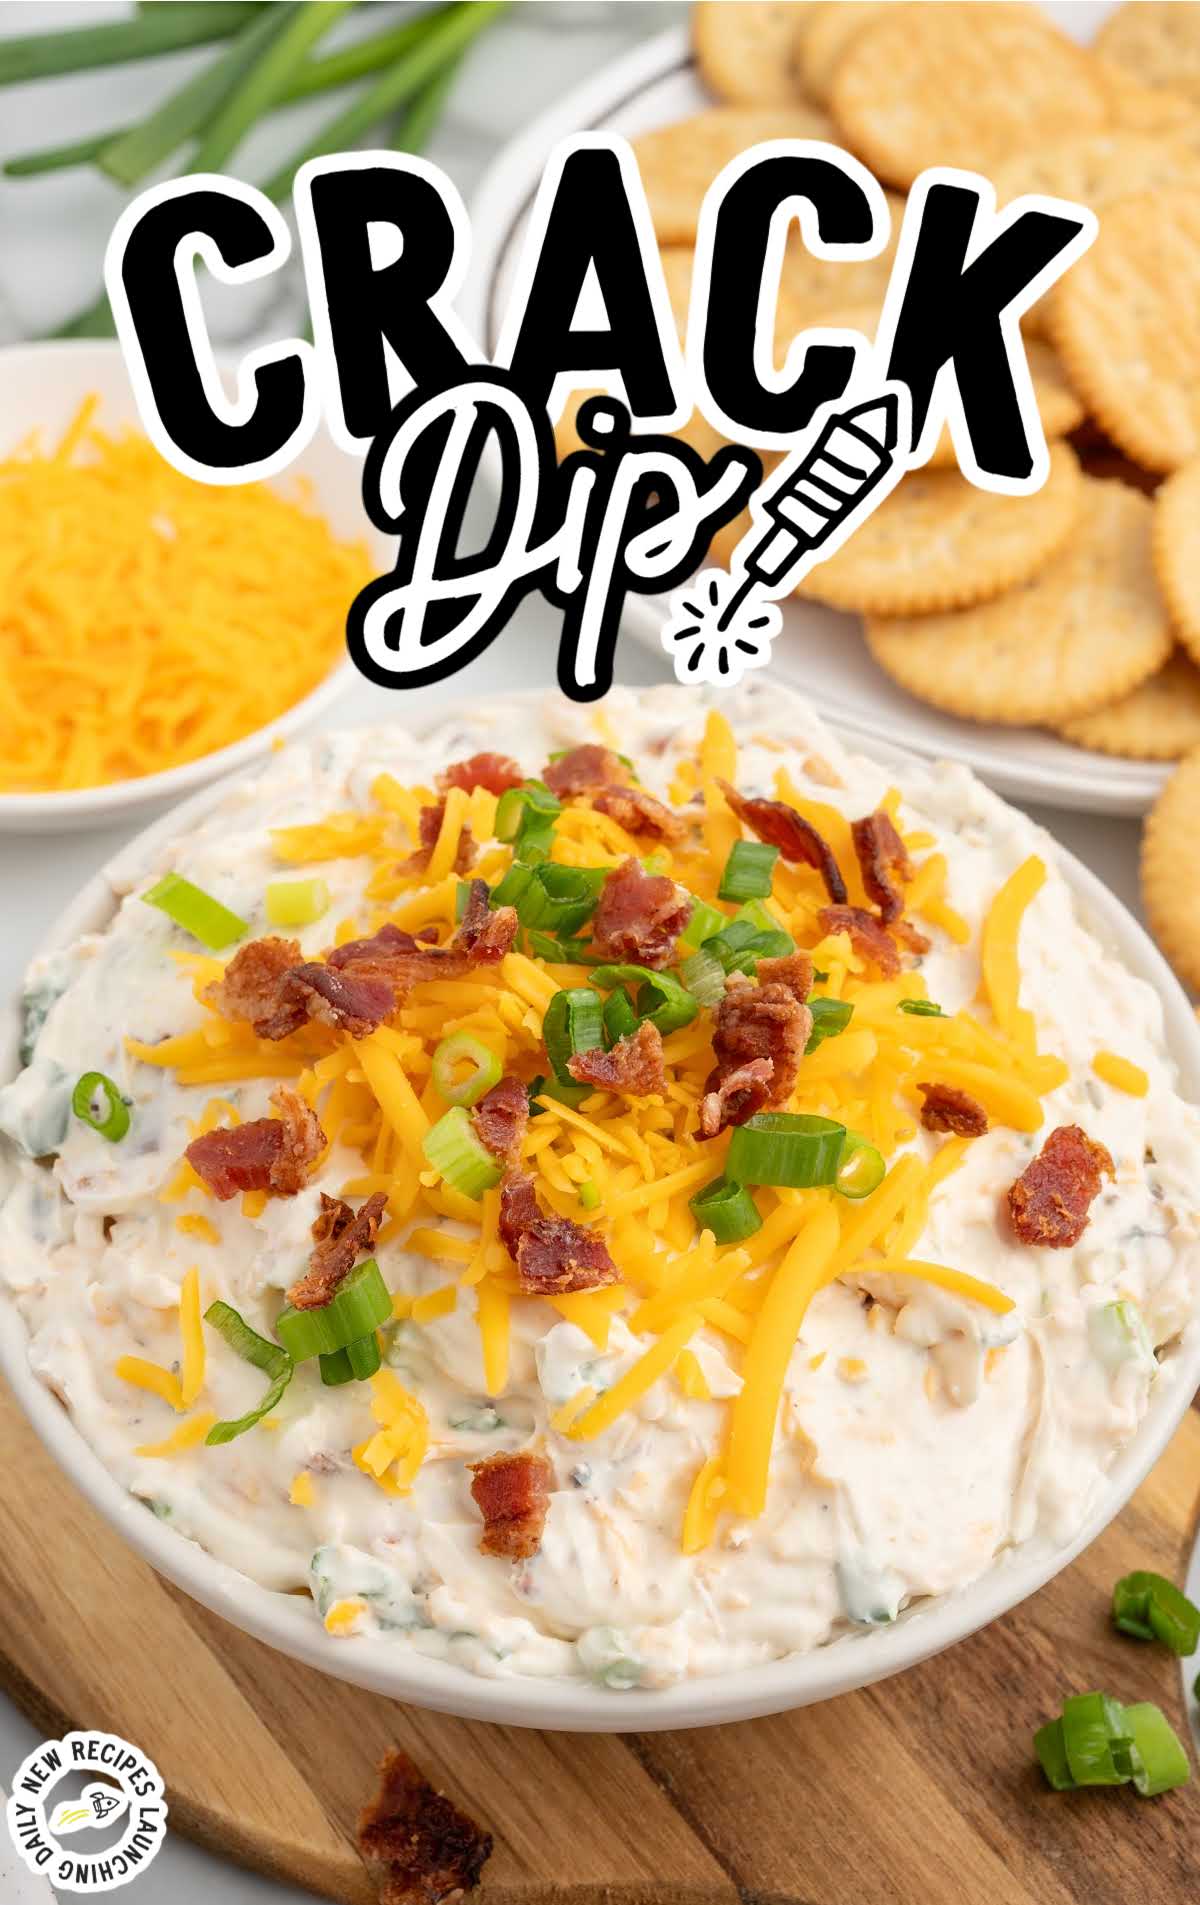 a bowl of Crack Dip topped with shredded cheese, bacon bits, and green onions